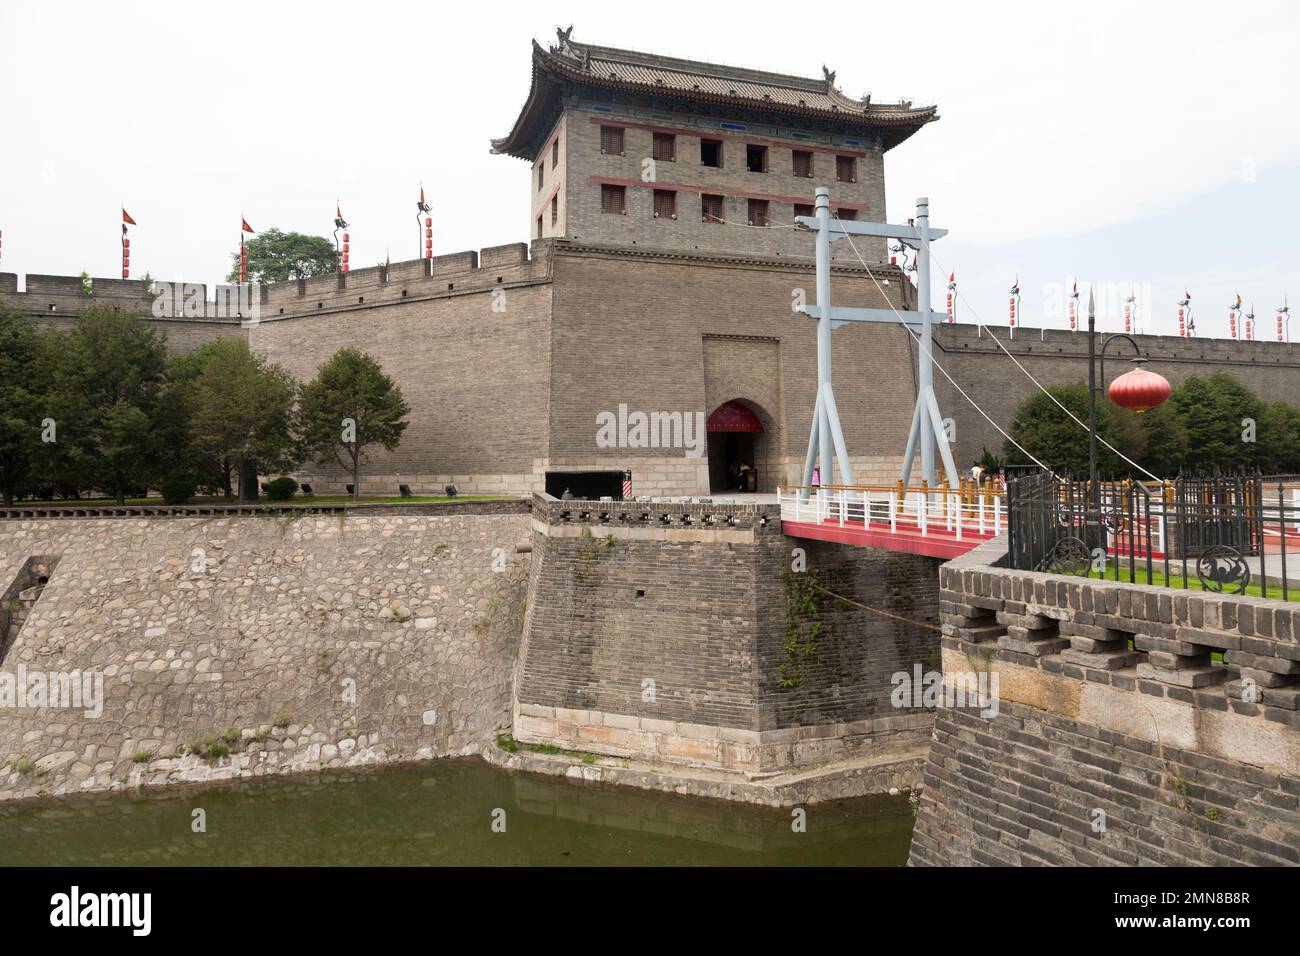 Heavily restored section of the fortifications of Xi'an, also known as Xian City Wall, complete with a gatehouse watch tower. A 'moat' with water, crossed by a bridge drawbridge further protects the ancient city. China. PRC. Stock Photo